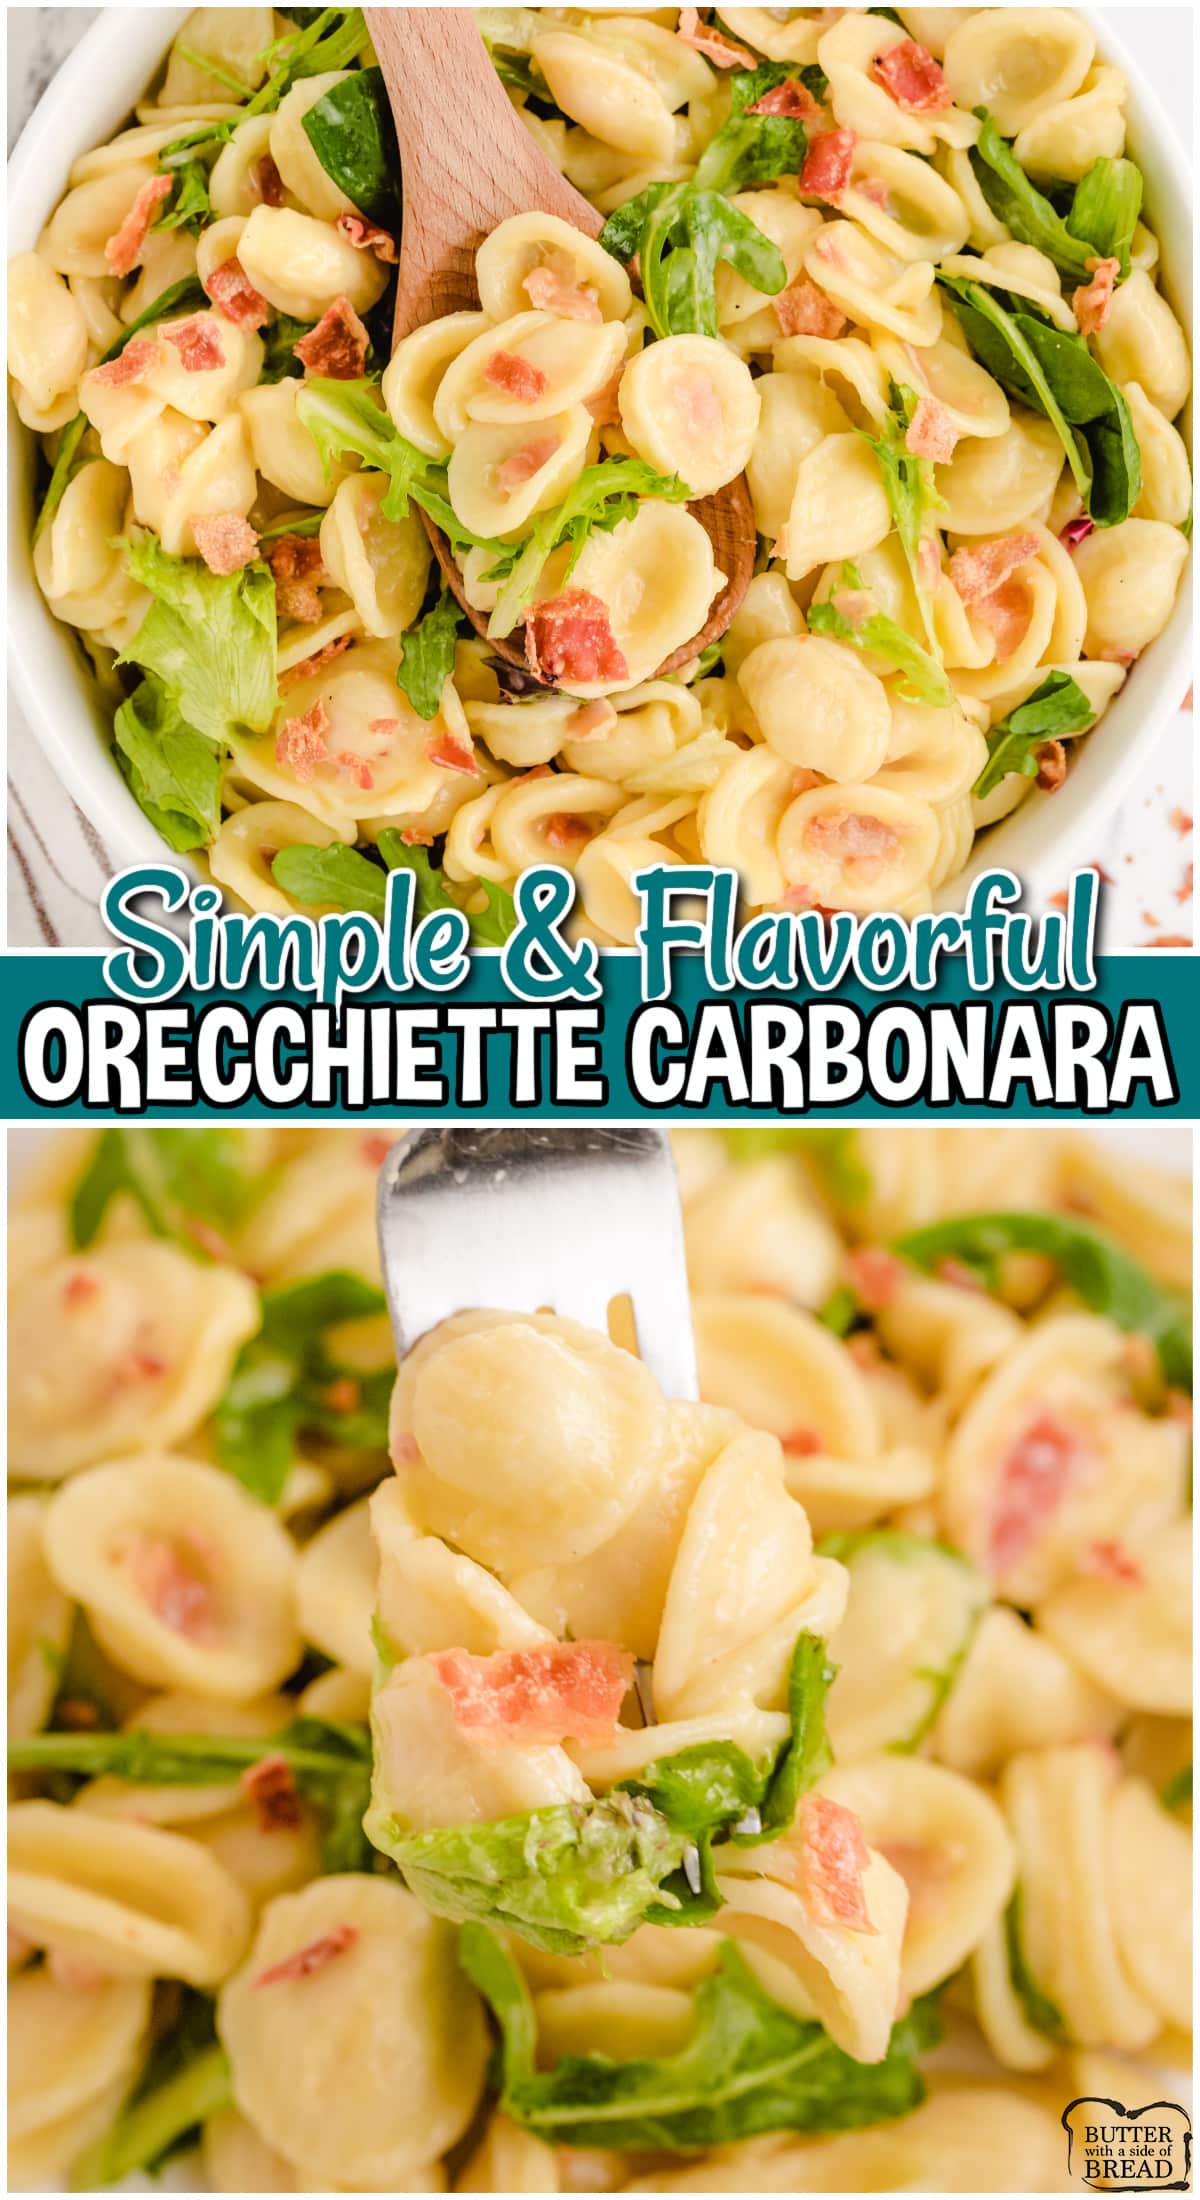 Orecchiette Carbonara is a fresh, light pasta dinner with a creamy sauce made from eggs, Parmesan cheese & lemon! Making this pasta carbonara is simple & results in velvety smooth pasta with crispy bacon! 